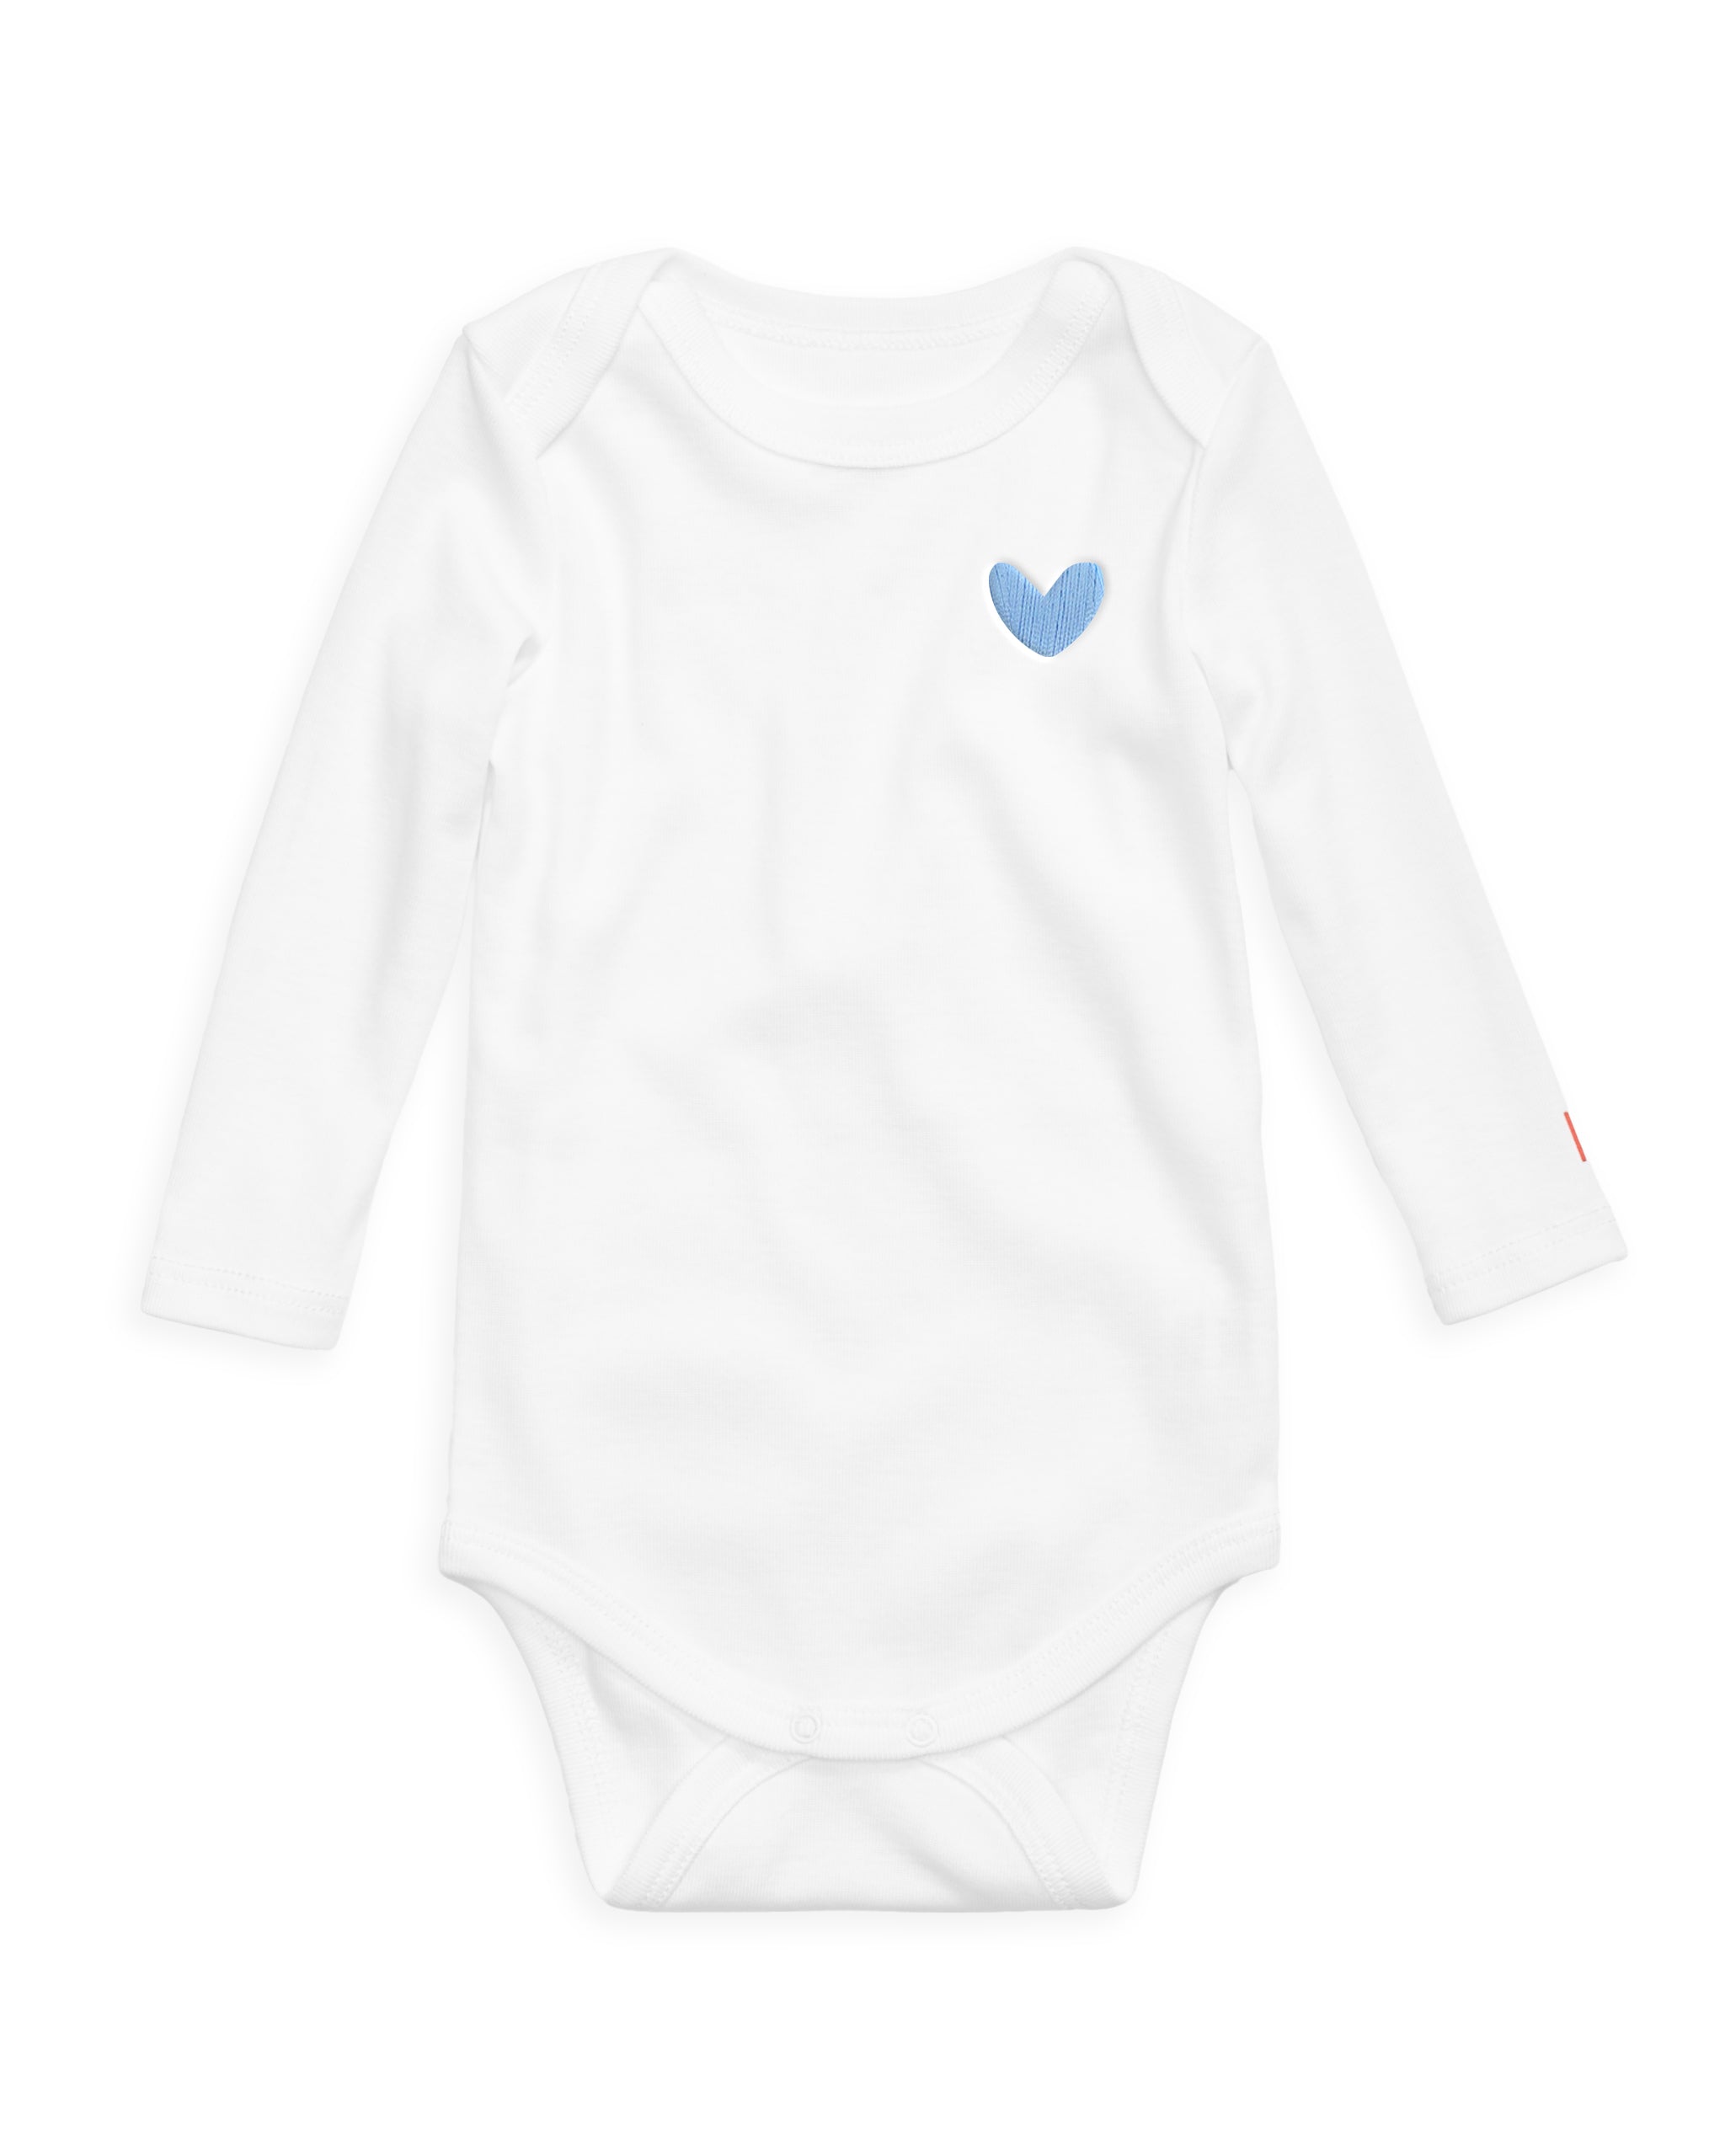 The Organic Embroidered Long Sleeve Onesie [White with Blue Heart]